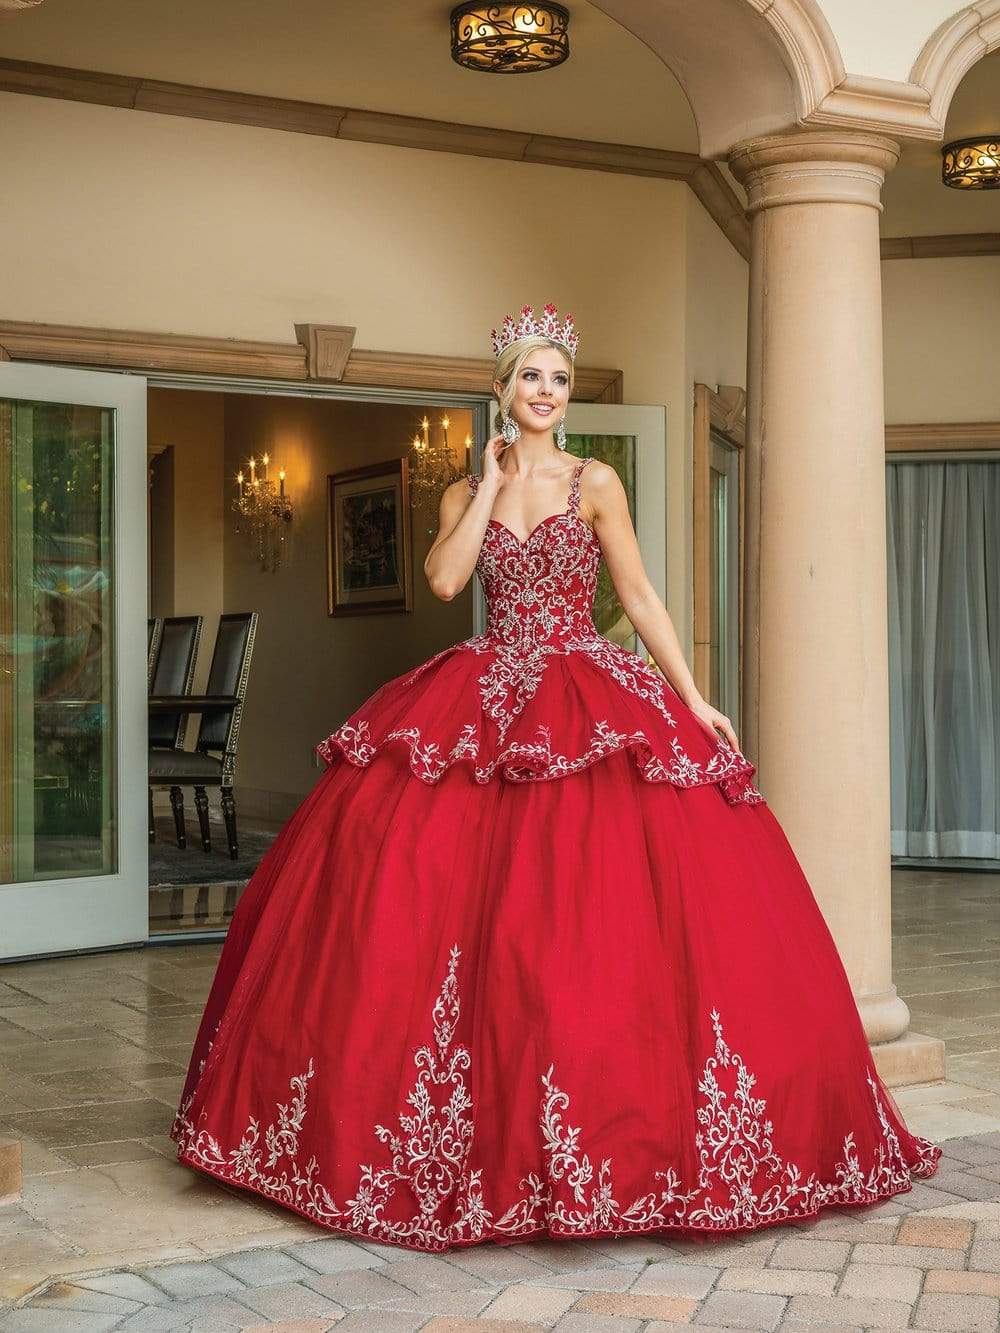 Dancing Queen - 1618 Thin Strap Sweetheart Tiered Ballgown Special Occasion Dress In Red